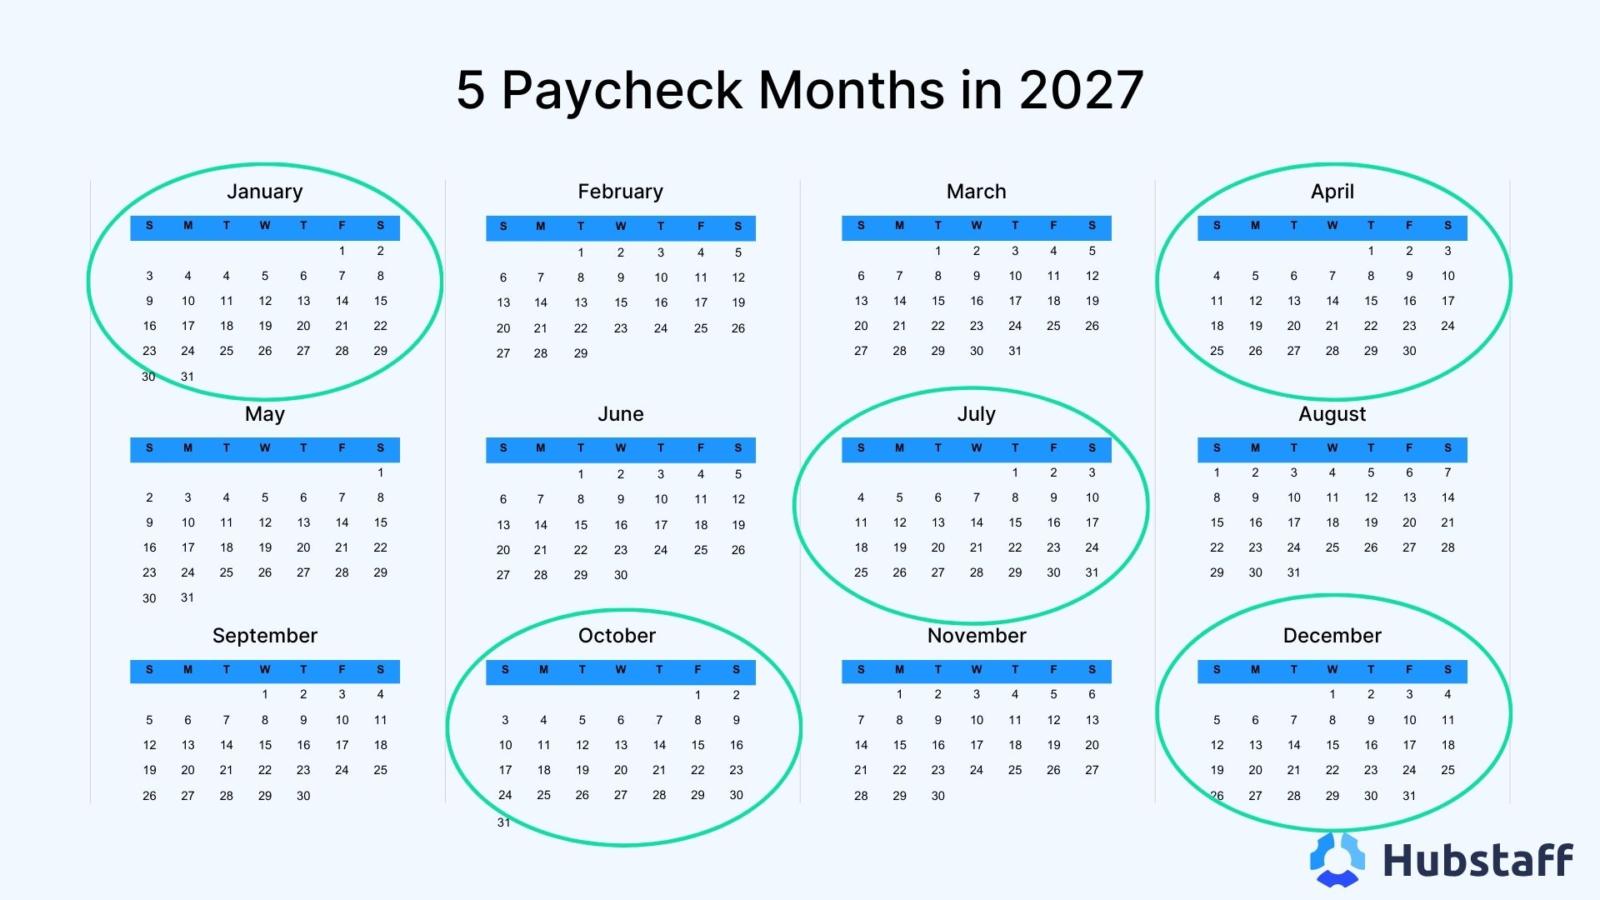 Five paycheck months in 2027